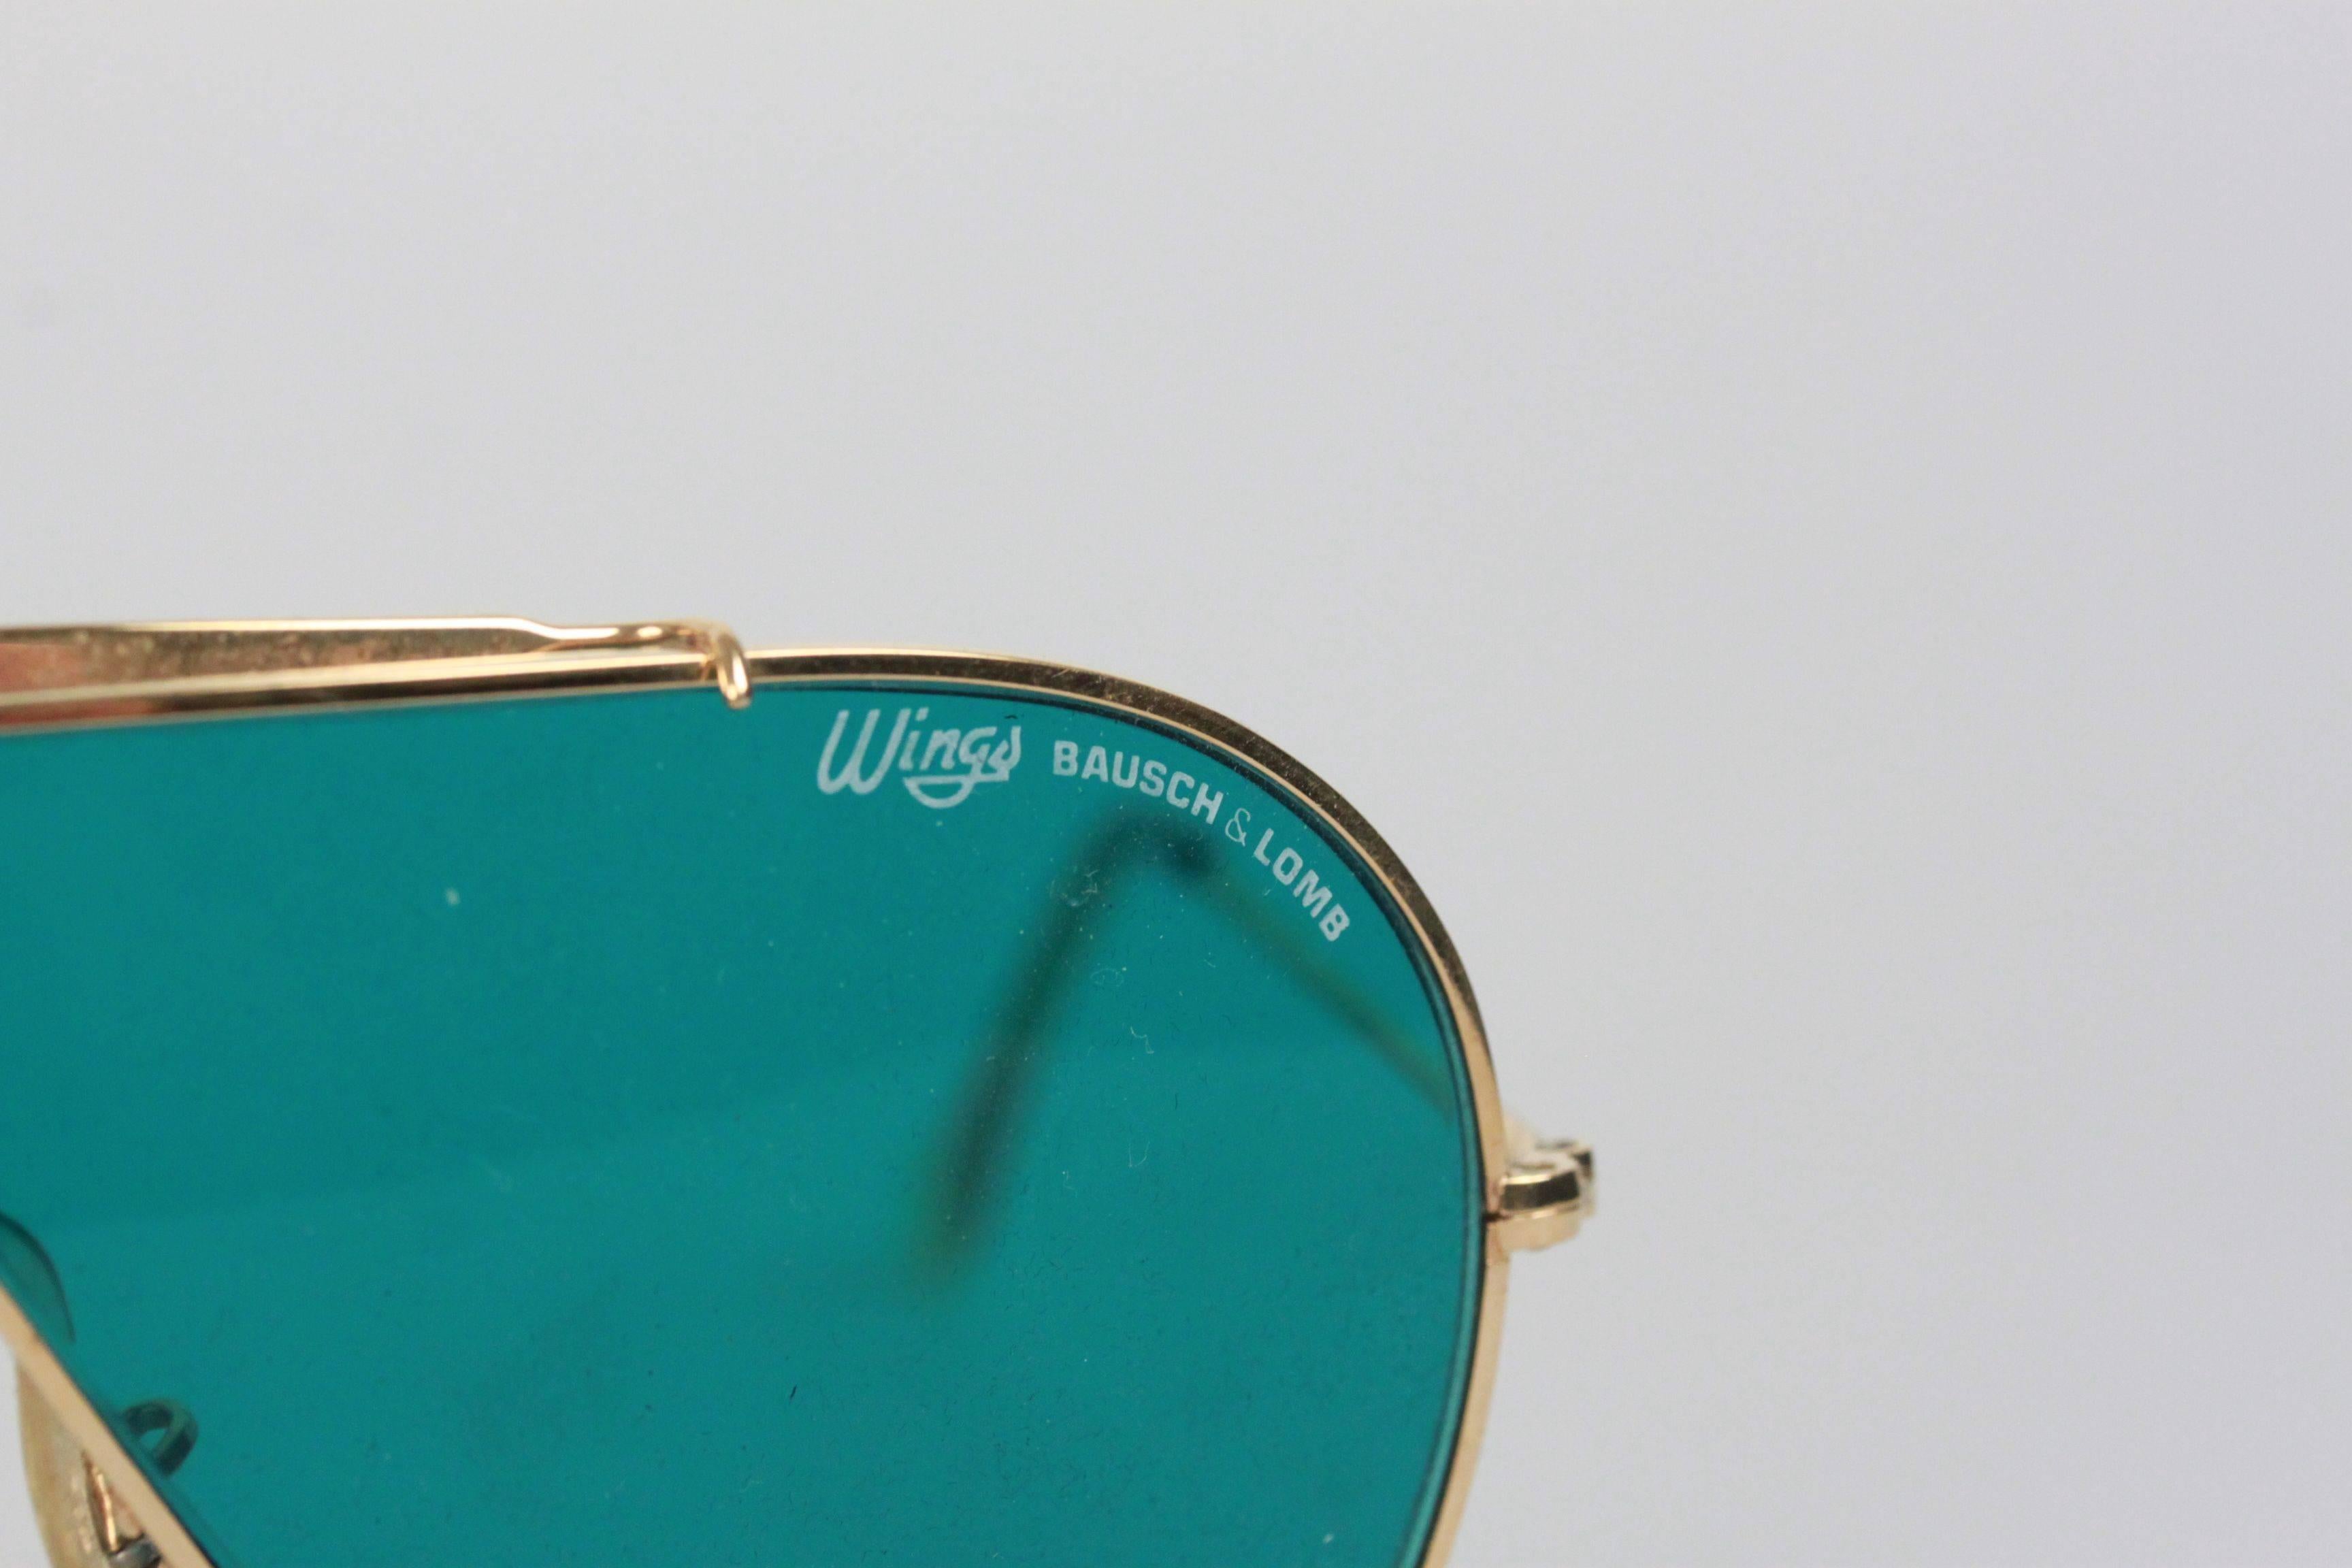 ray ban wings vintage